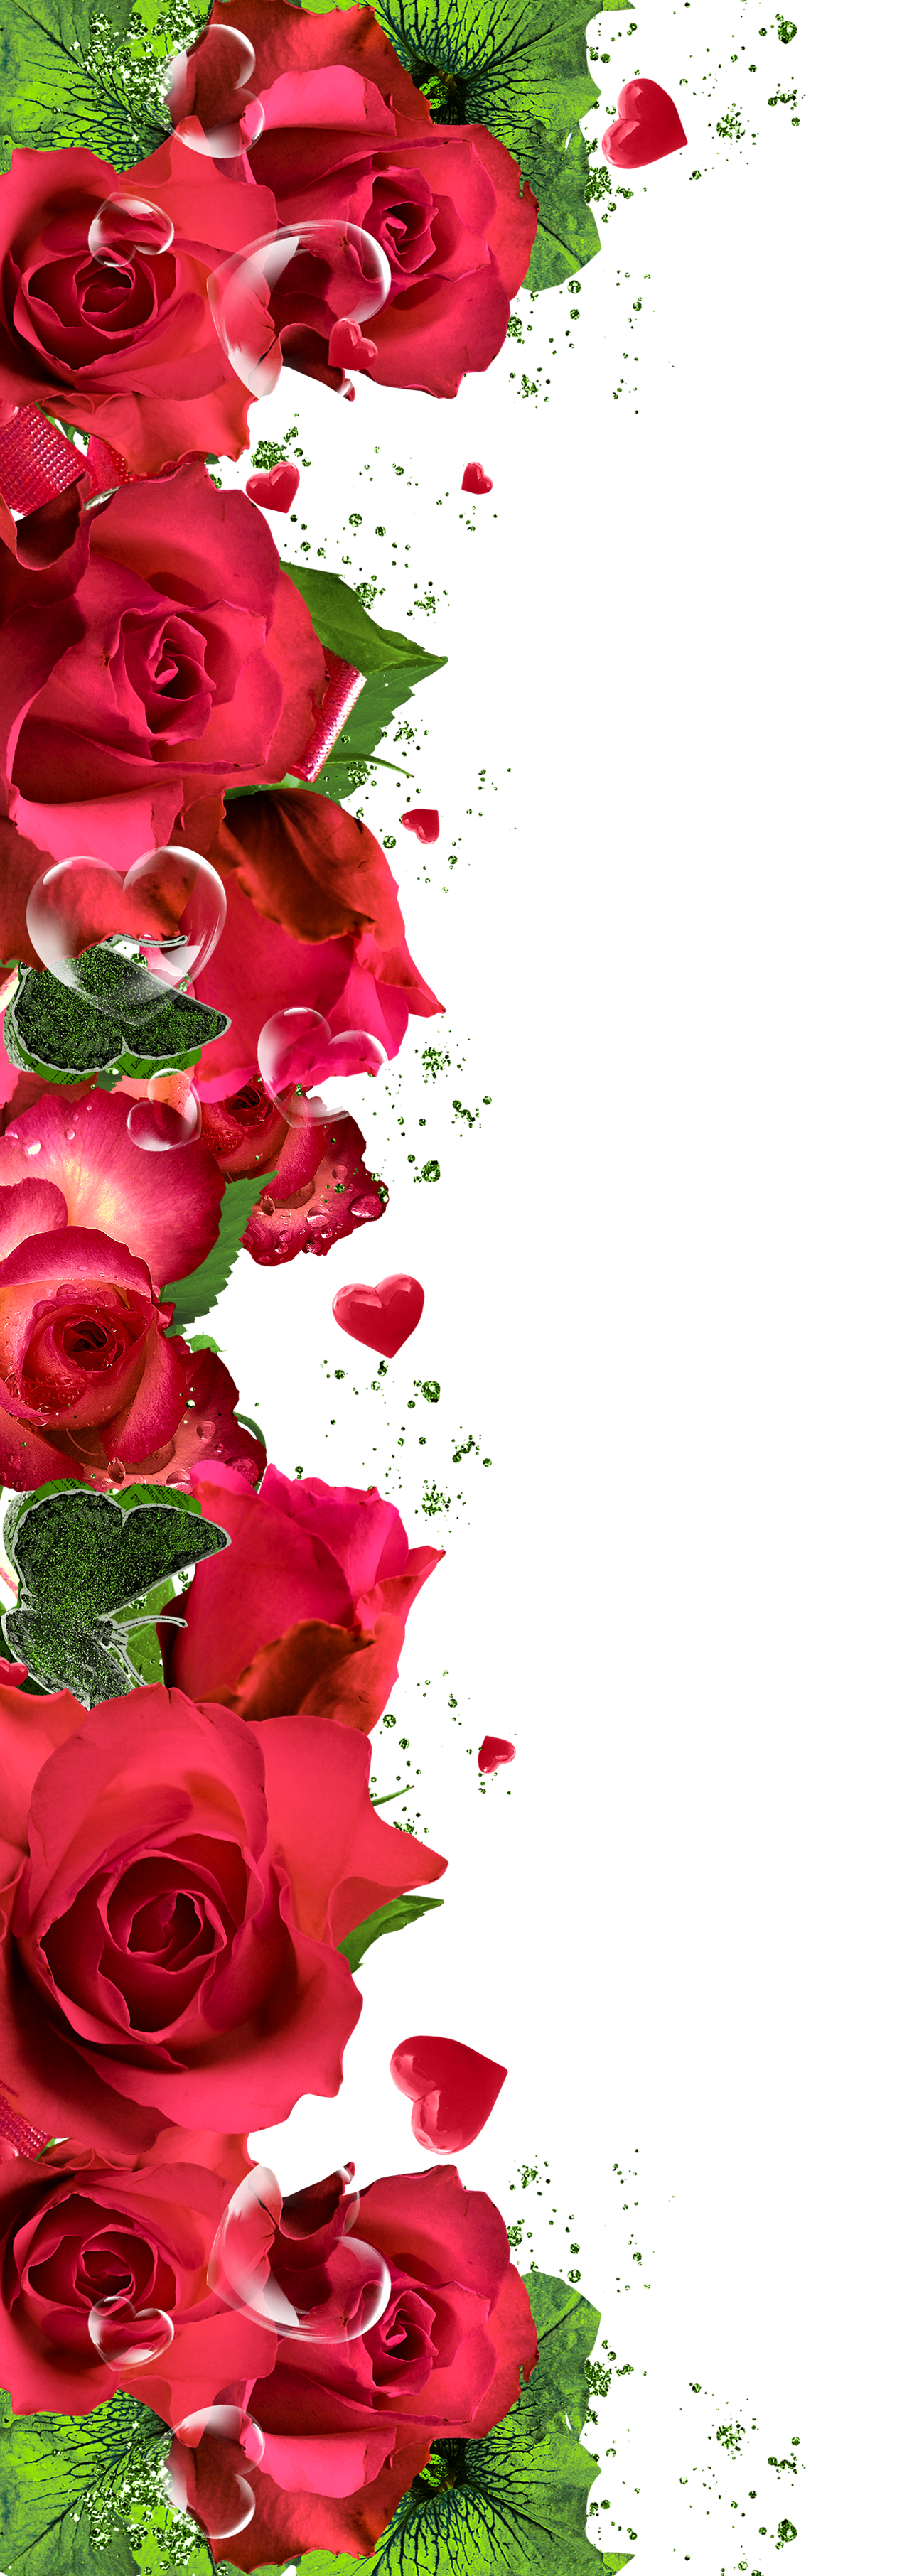 Clipart rose bed. Red roses ornament decor